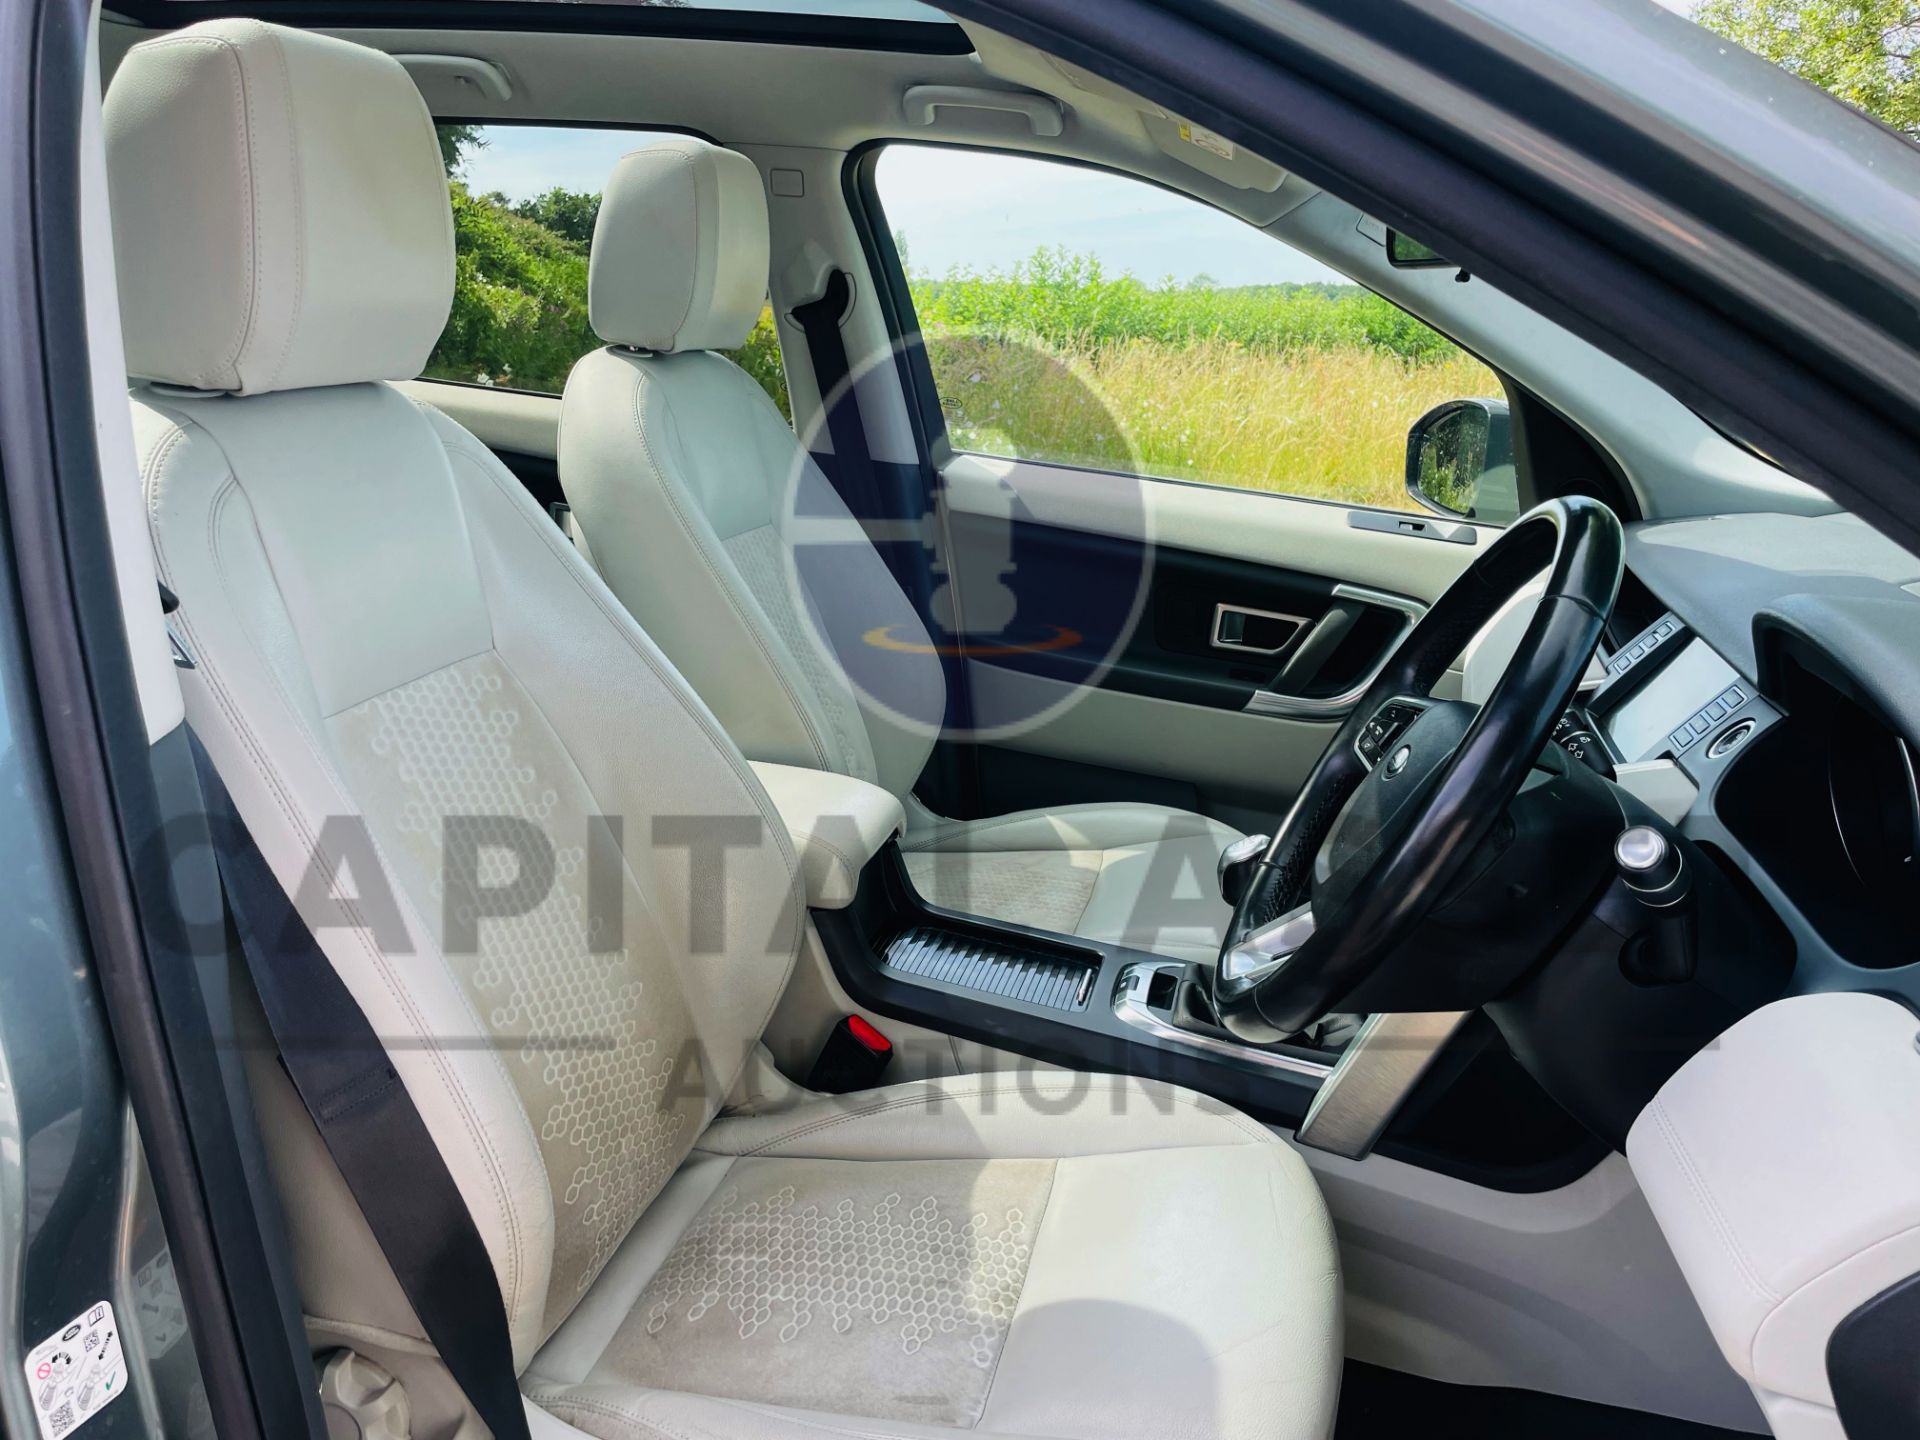 (On Sale) LAND ROVER DISCOVERY SPORT *SE TECH* SUV (2019 - EURO 6) 2.0 ED4 - STOP/START *HUGE SPEC* - Image 36 of 55